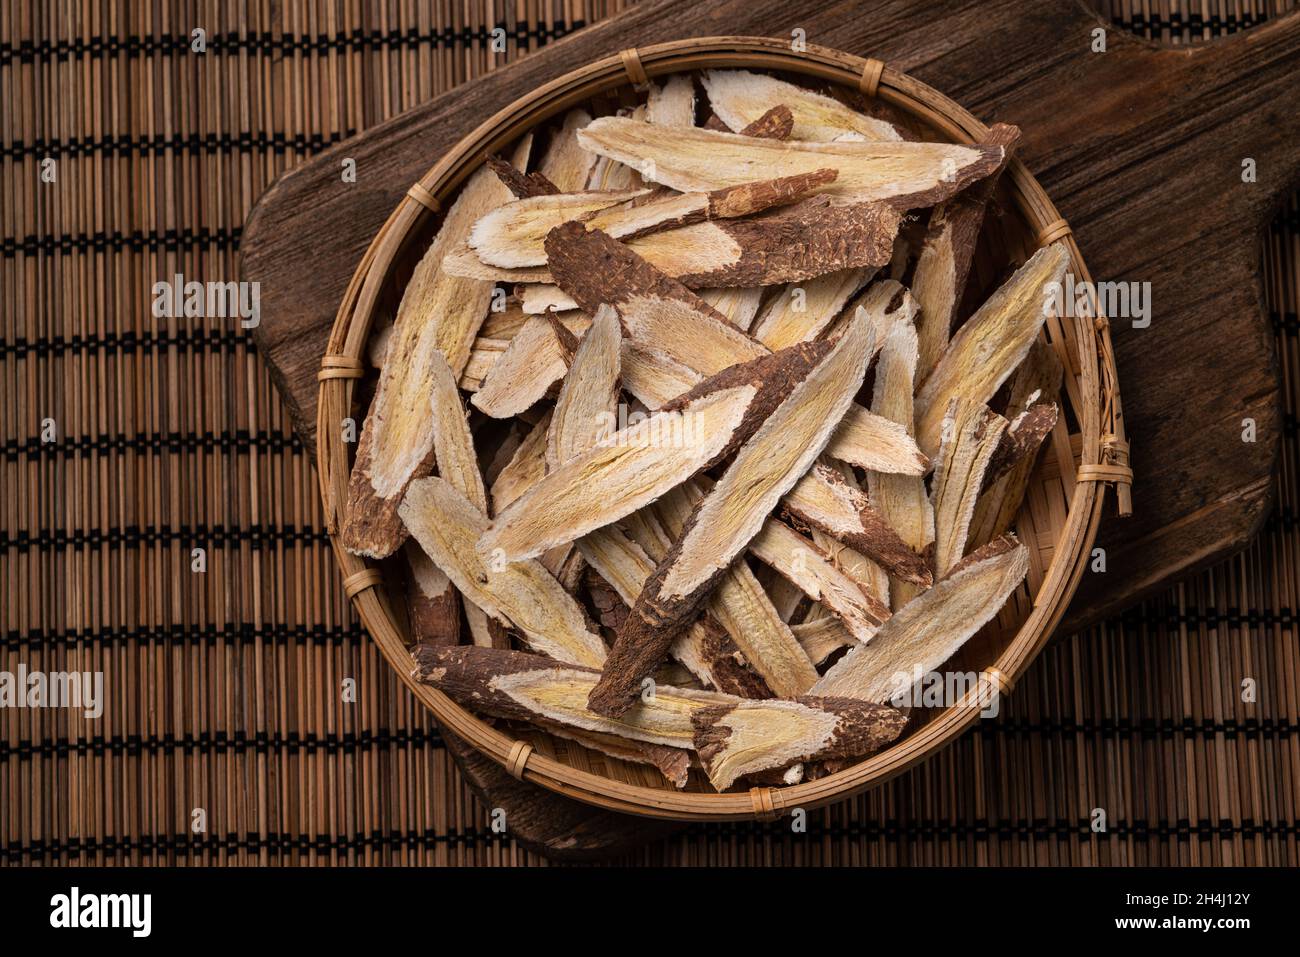 Top view of Chinese traditional herbal medicine Astragalus root on wooden table background. Stock Photo